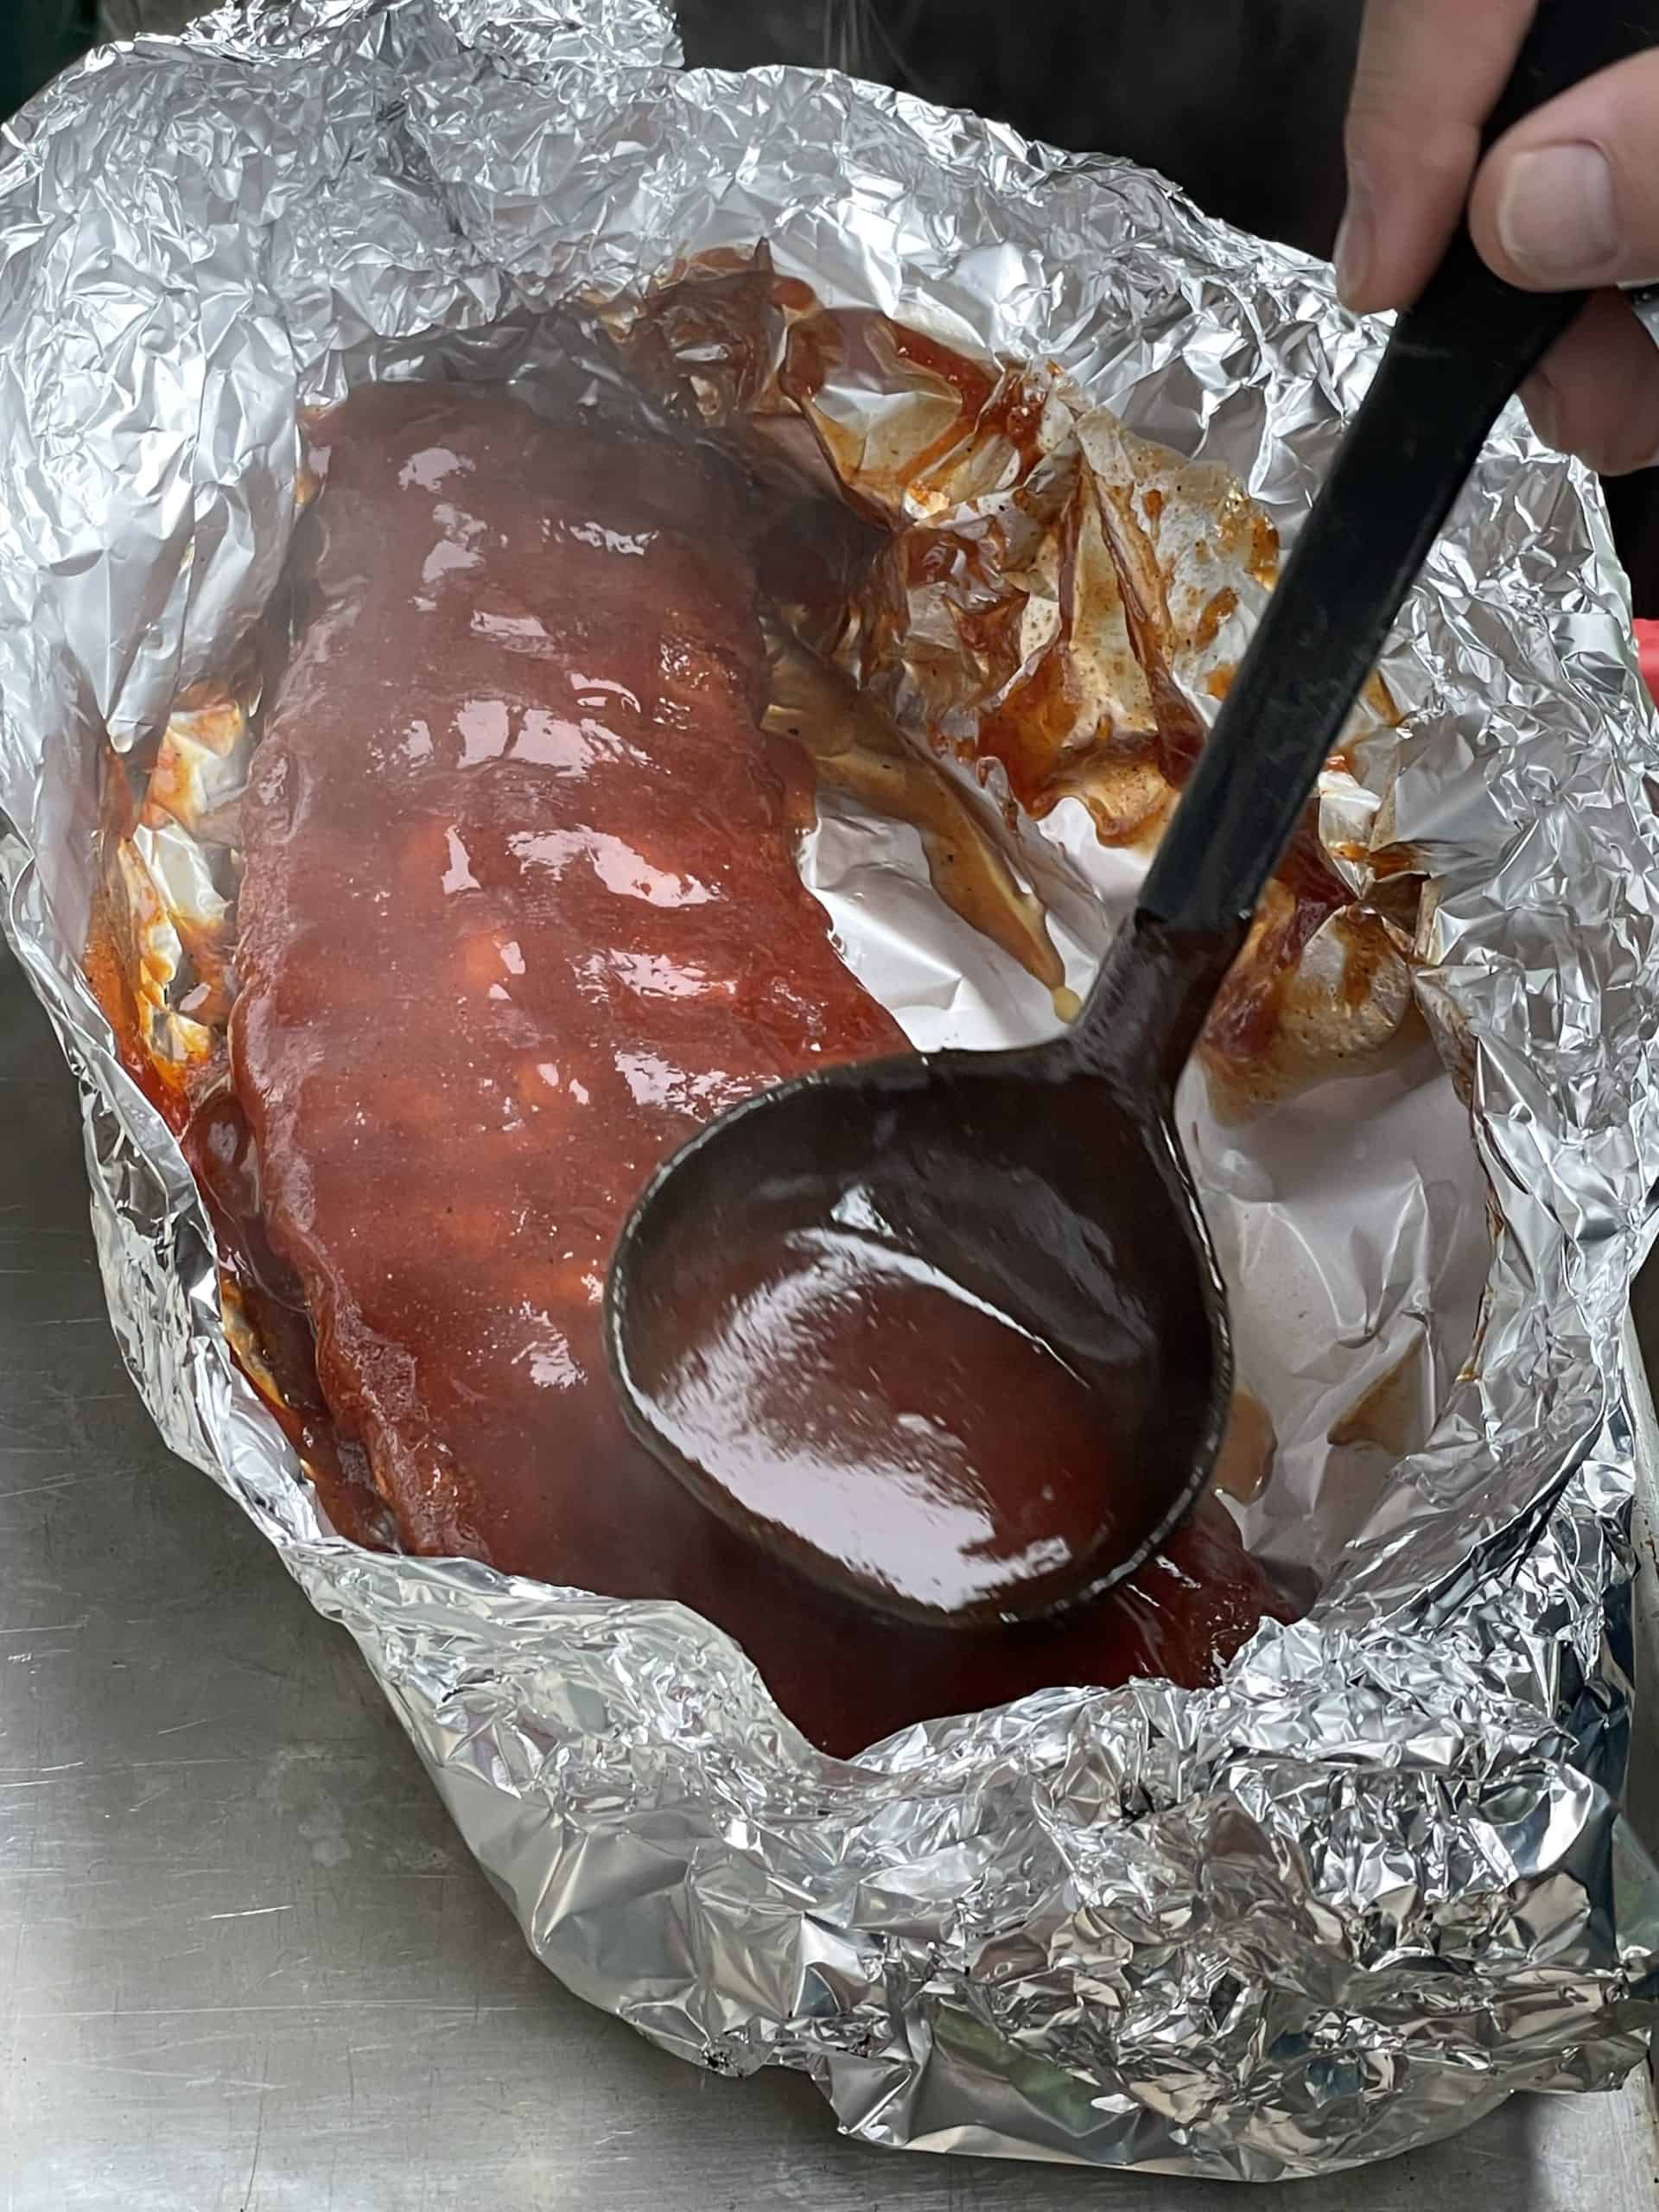 Smoker BBQ Sauce Ribs wrapped in foil.